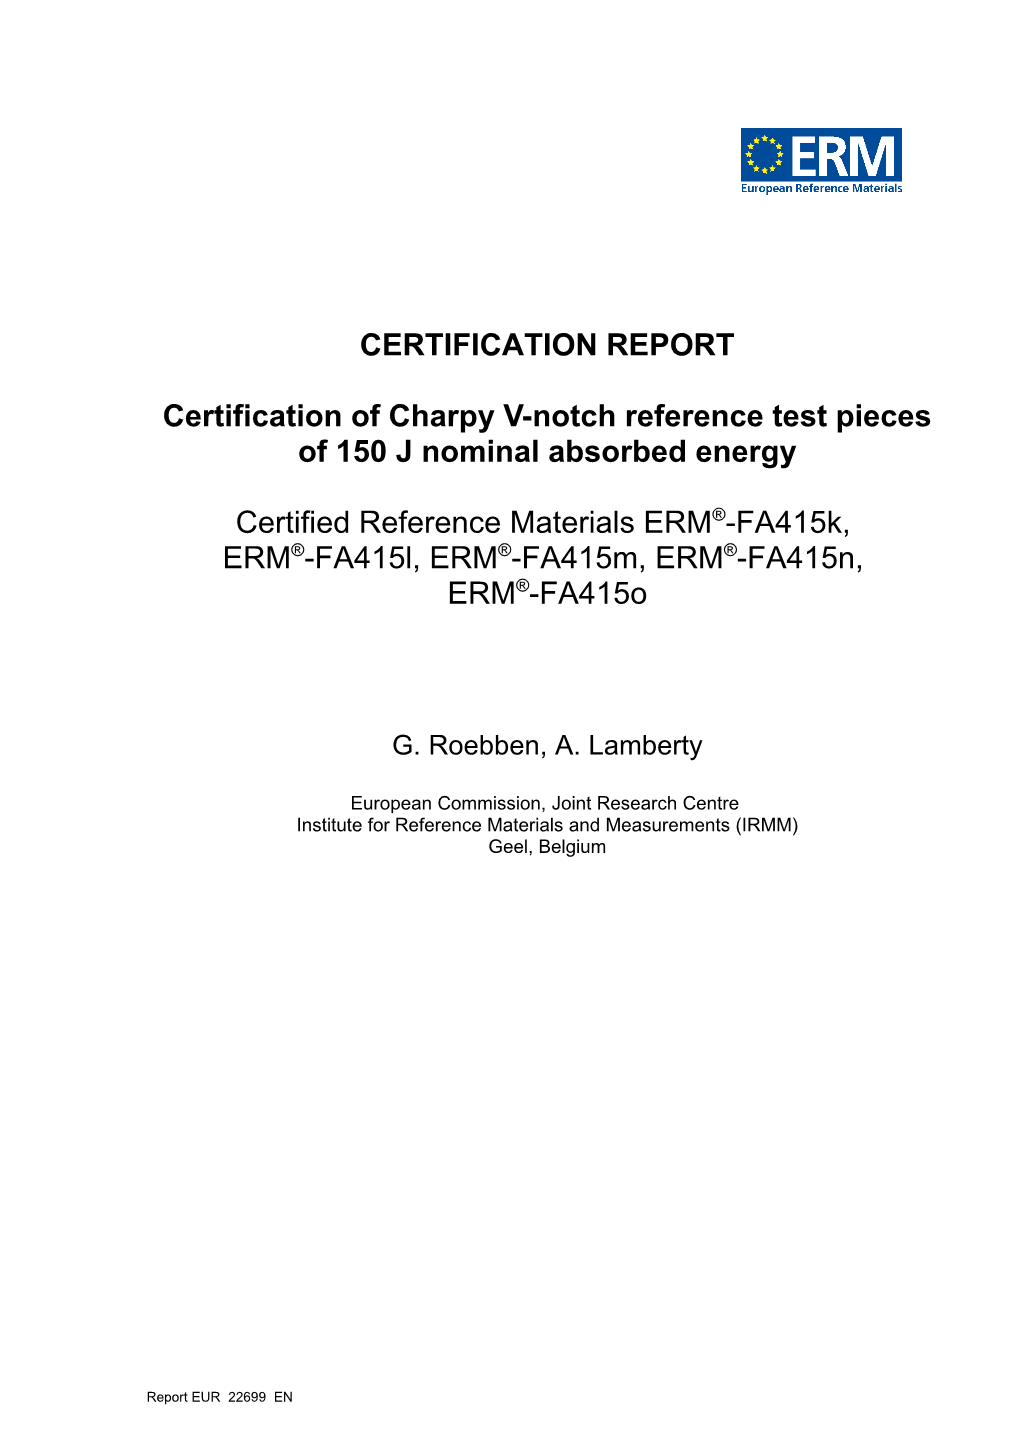 Certification of Charpy V-Notch Reference Test Pieces of 150J Nominal Absorbed Energy